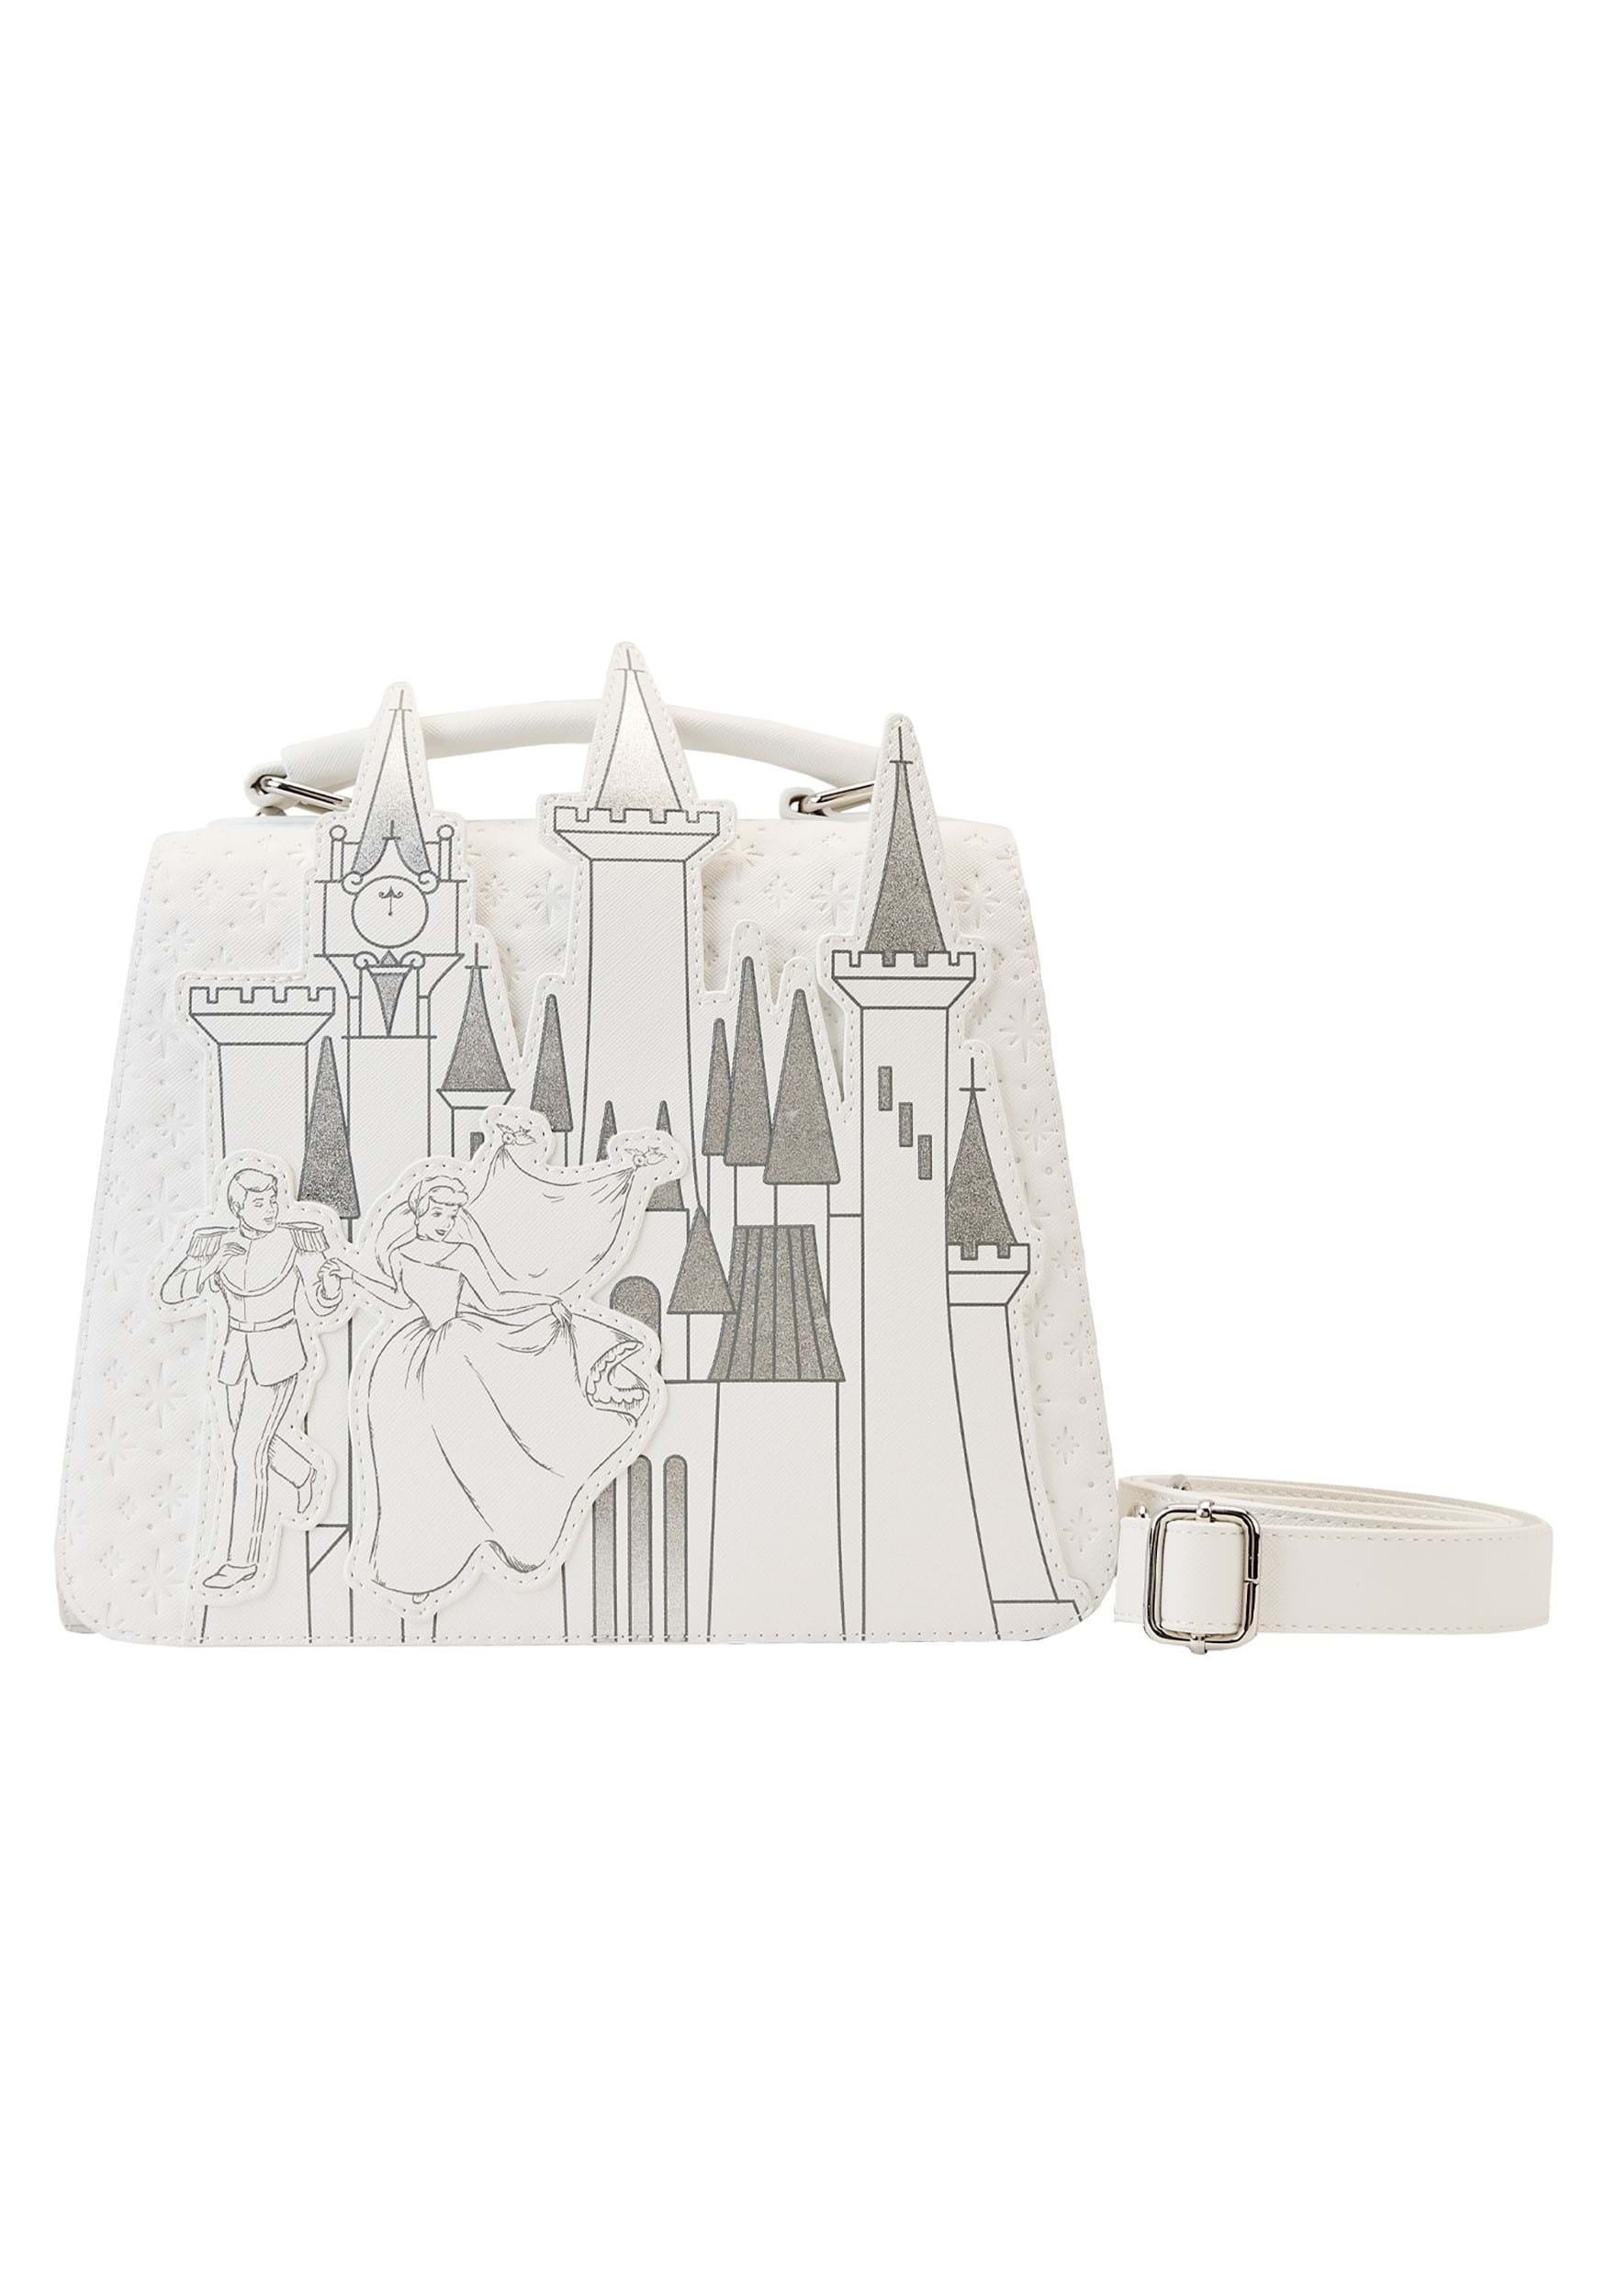 Disney Cinderella Happily Ever After Crossbody Bag by Loungefly